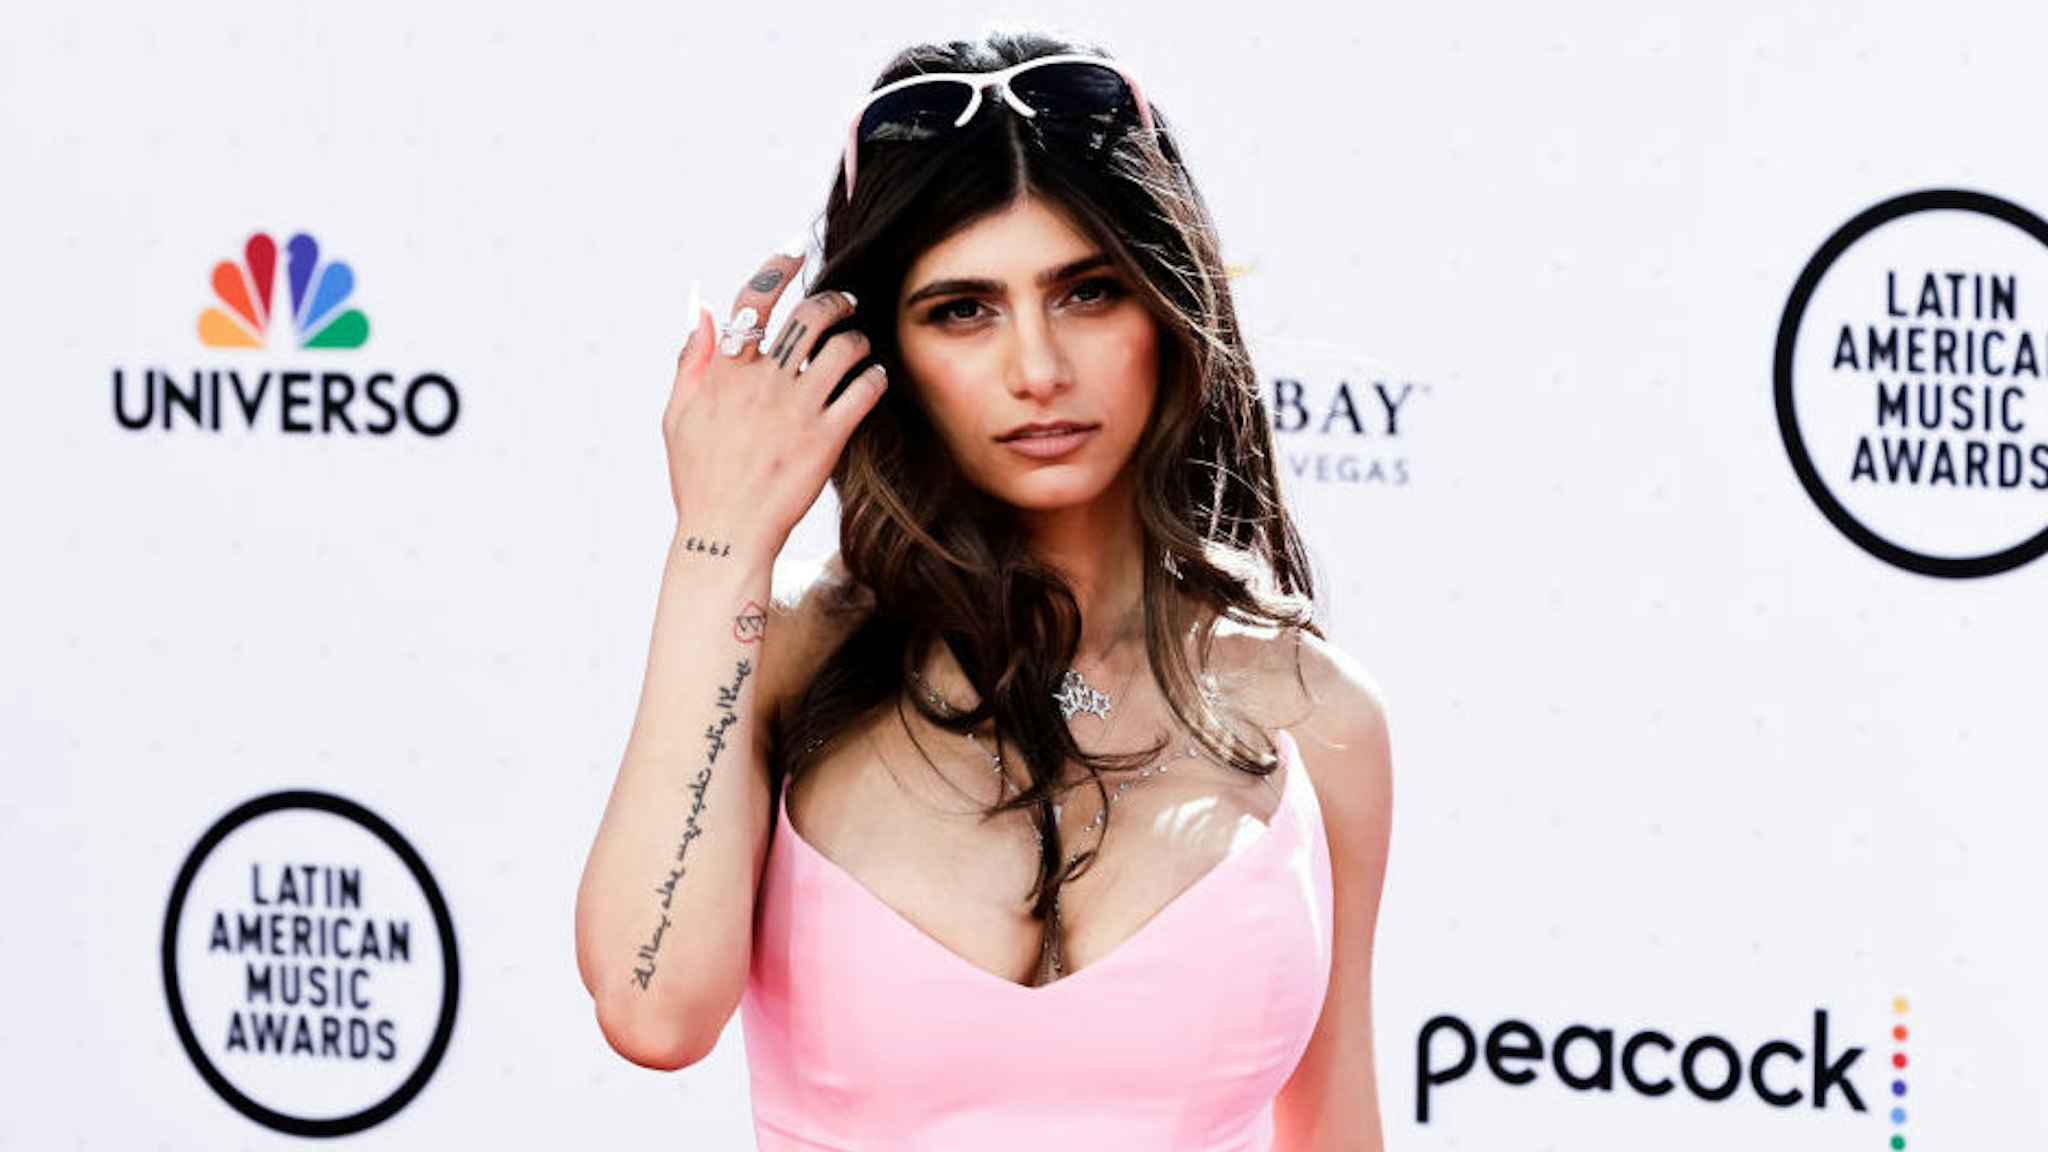 Mia Khalifa arrives at the 2022 Latin American Music Awards at Michelob ULTRA Arena on April 21, 2022 in Las Vegas, Nevada.